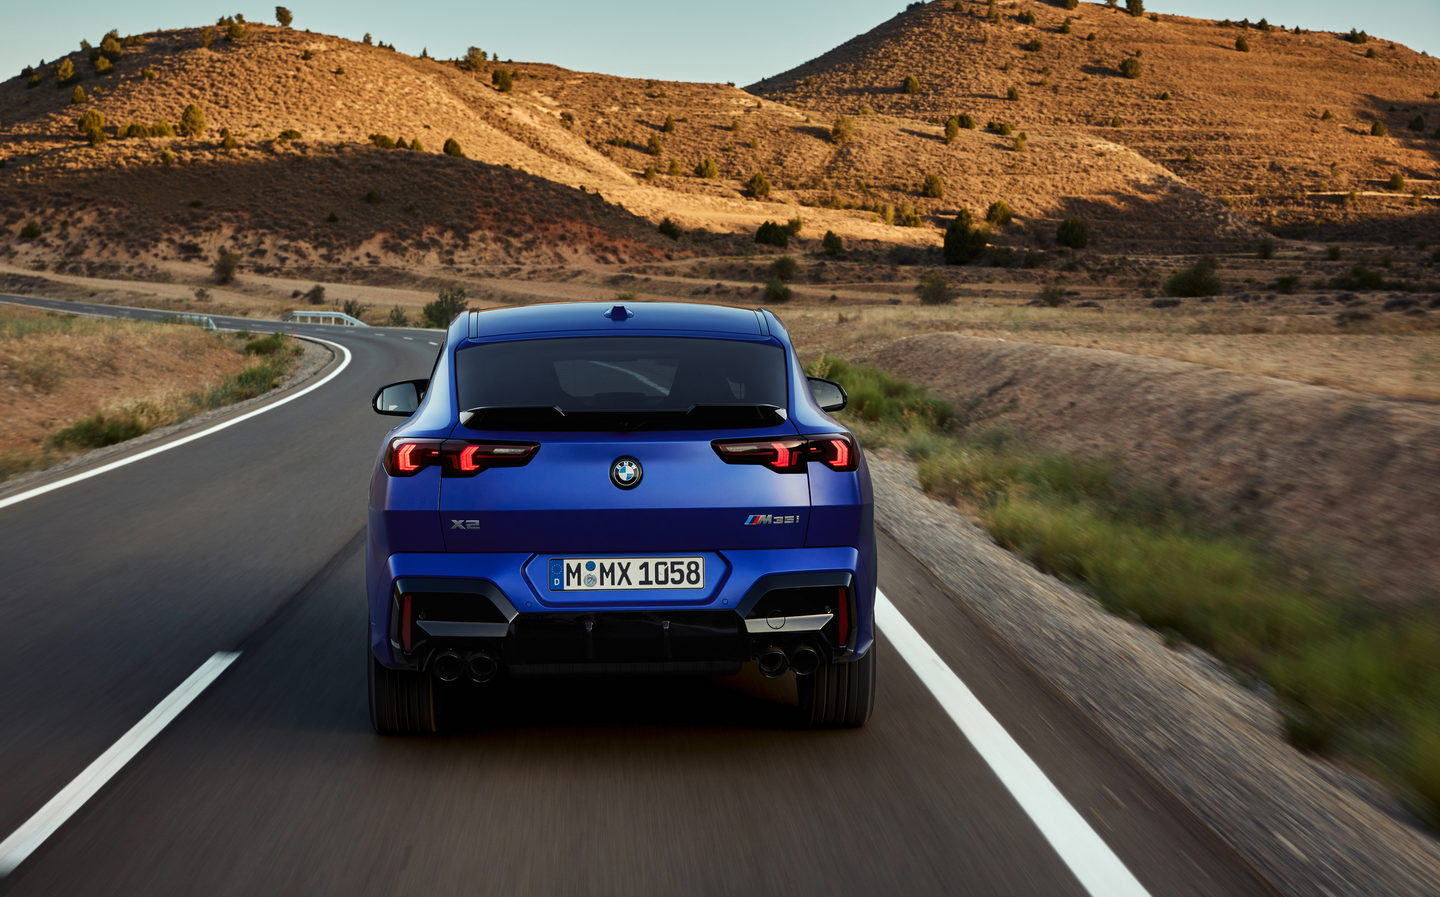 coupe-suv, electric, bmw unveils rakish x2 and ix2 spin-offs of the x1 and ix1, including a hot m35i version